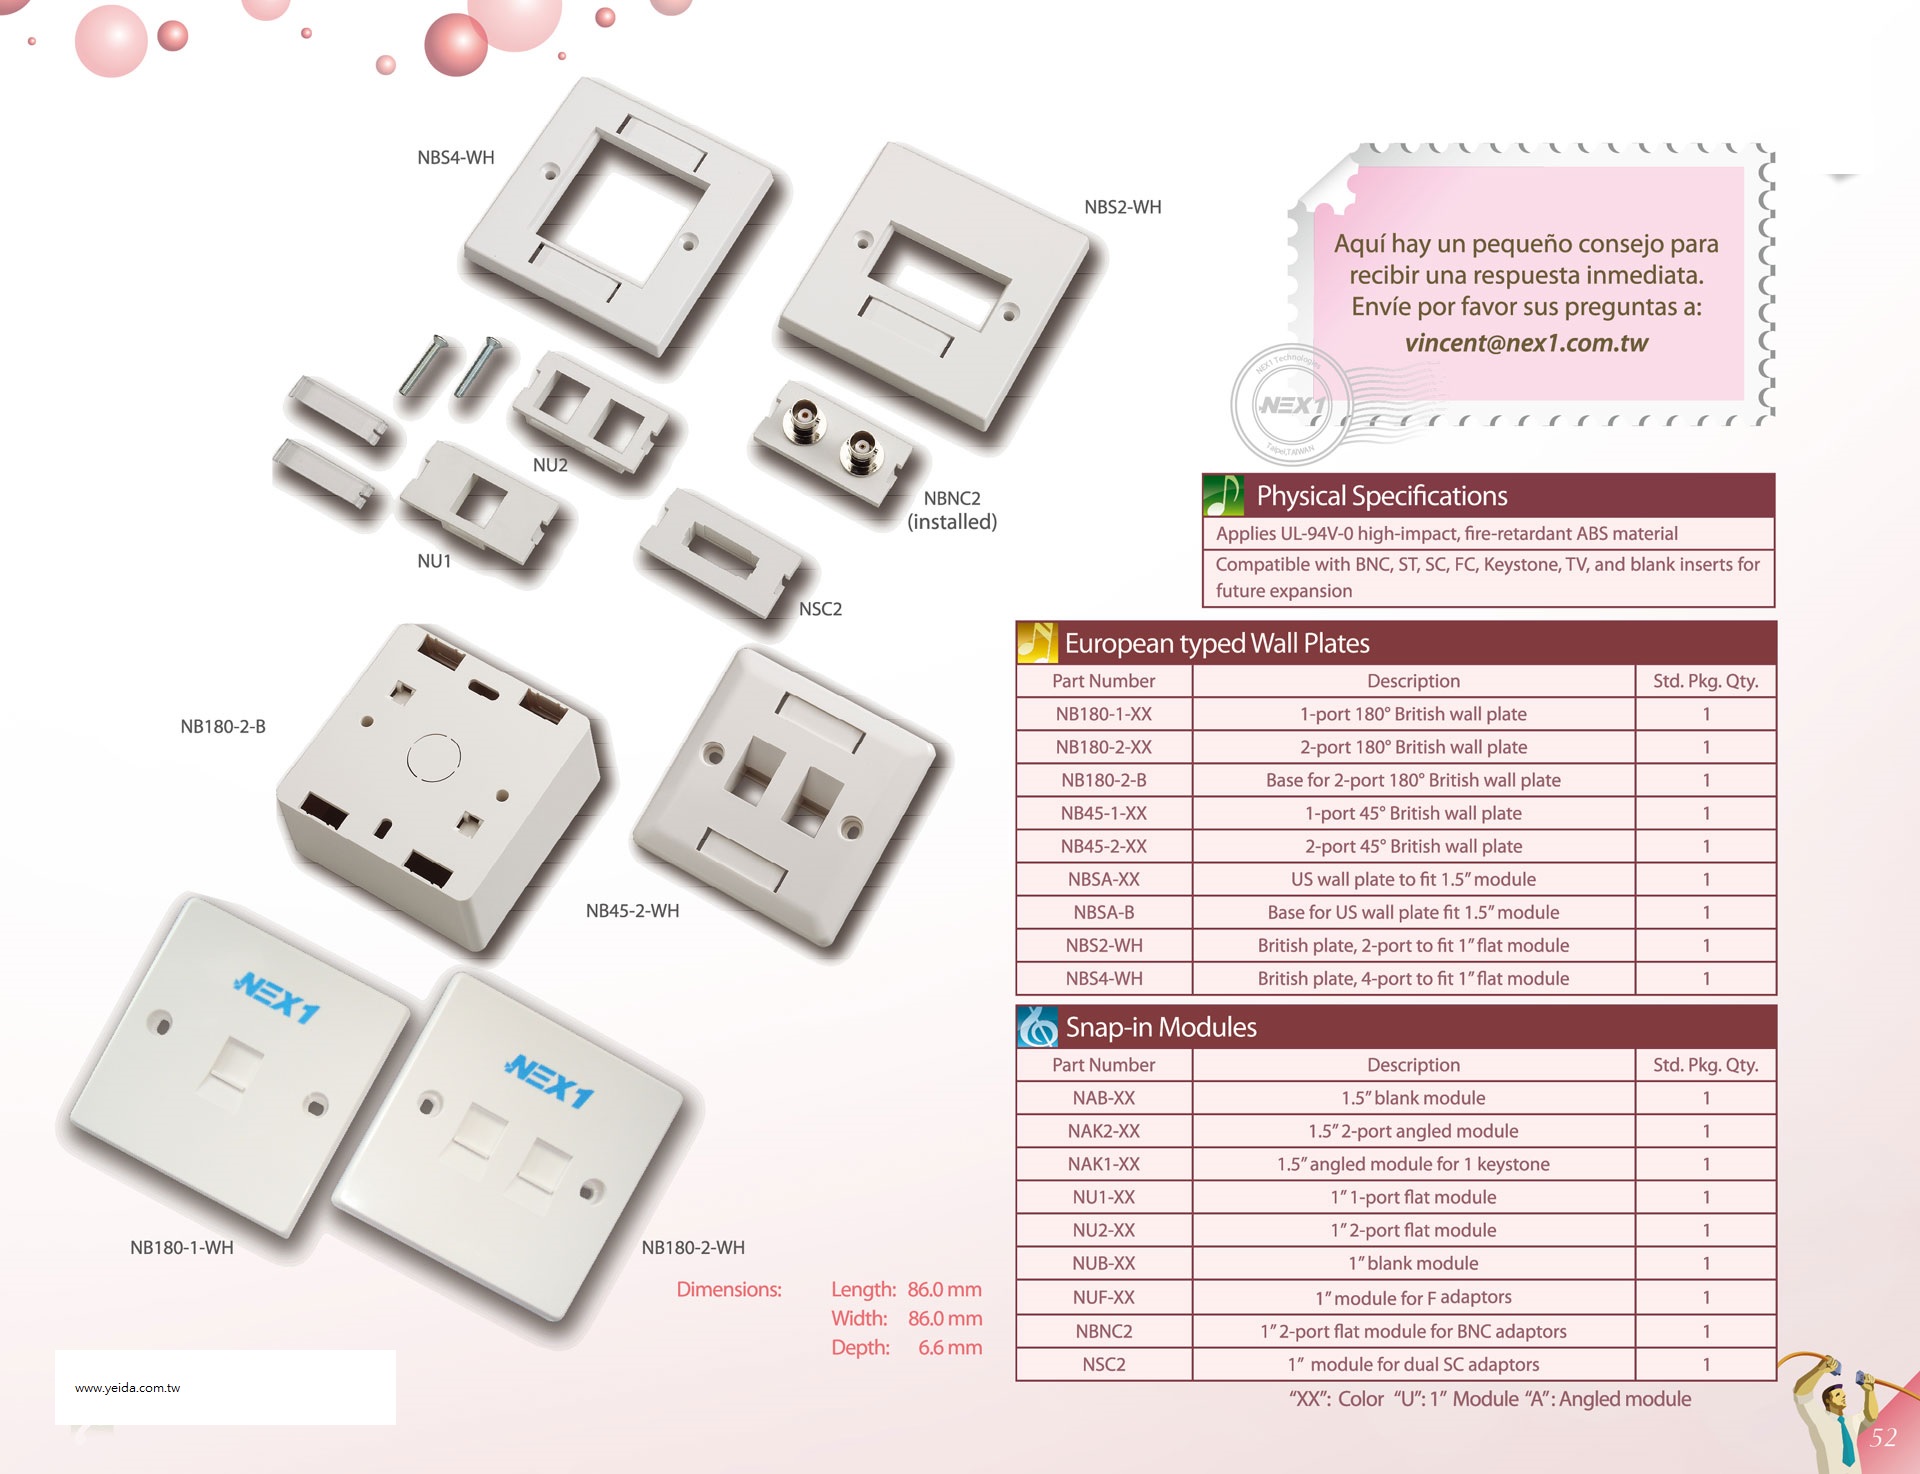 NEX-1 European typed wall plate specifications & ordering references歐規資訊盒面板產品圖